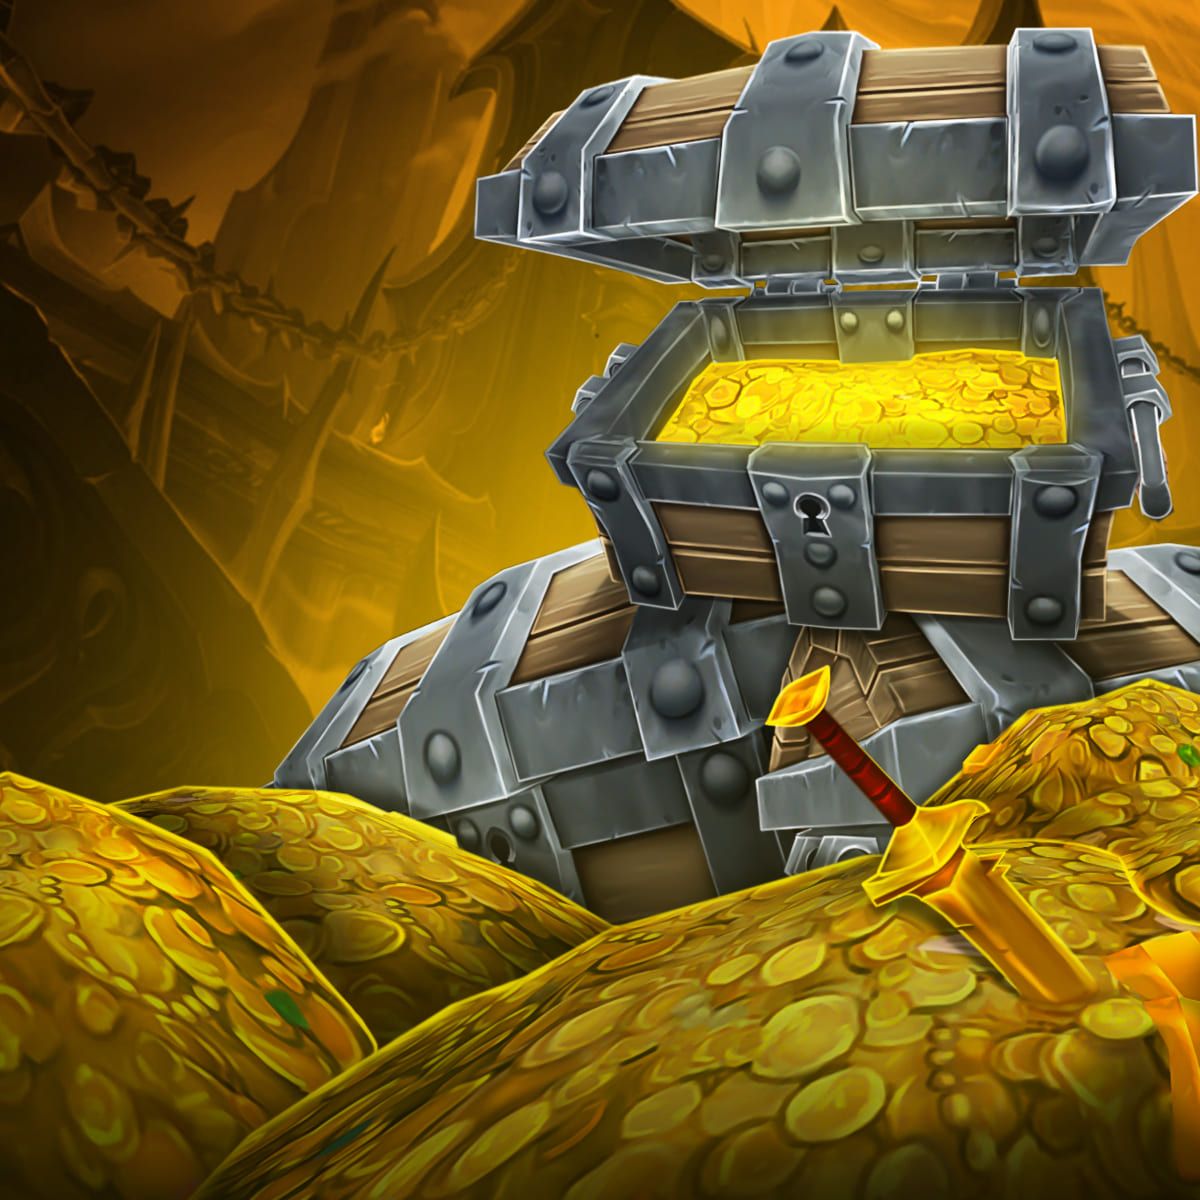 Buy WoW Gold – Cheap of Warcraft Gold For Sale, Best Prices at